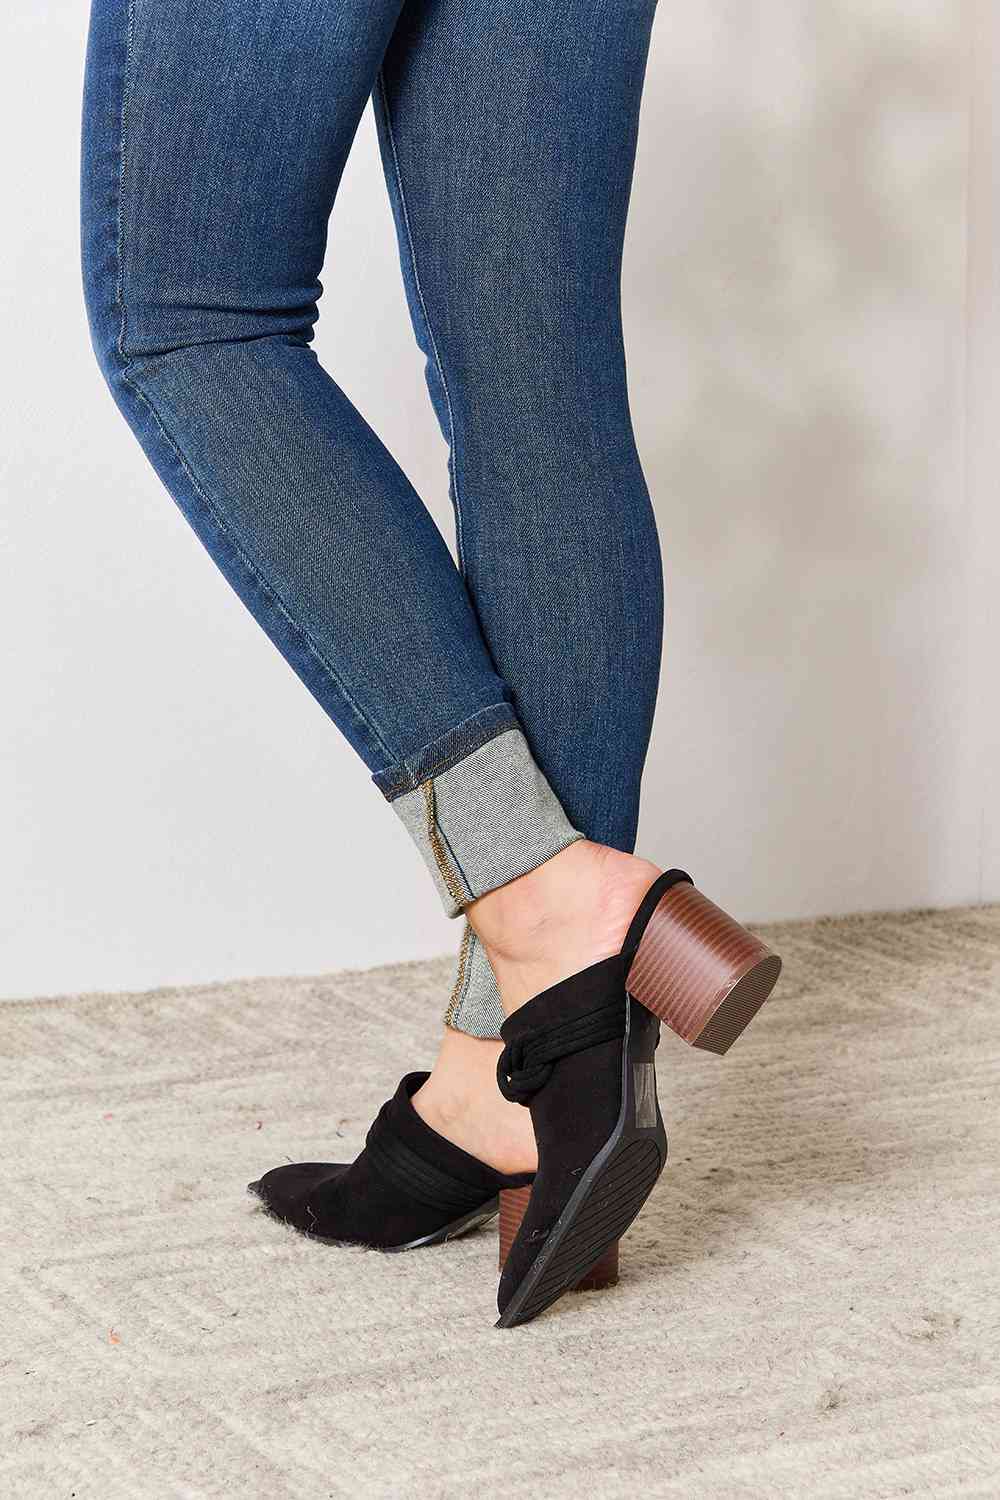 Slide into Fall Braided Mules - Cheeky Chic Boutique